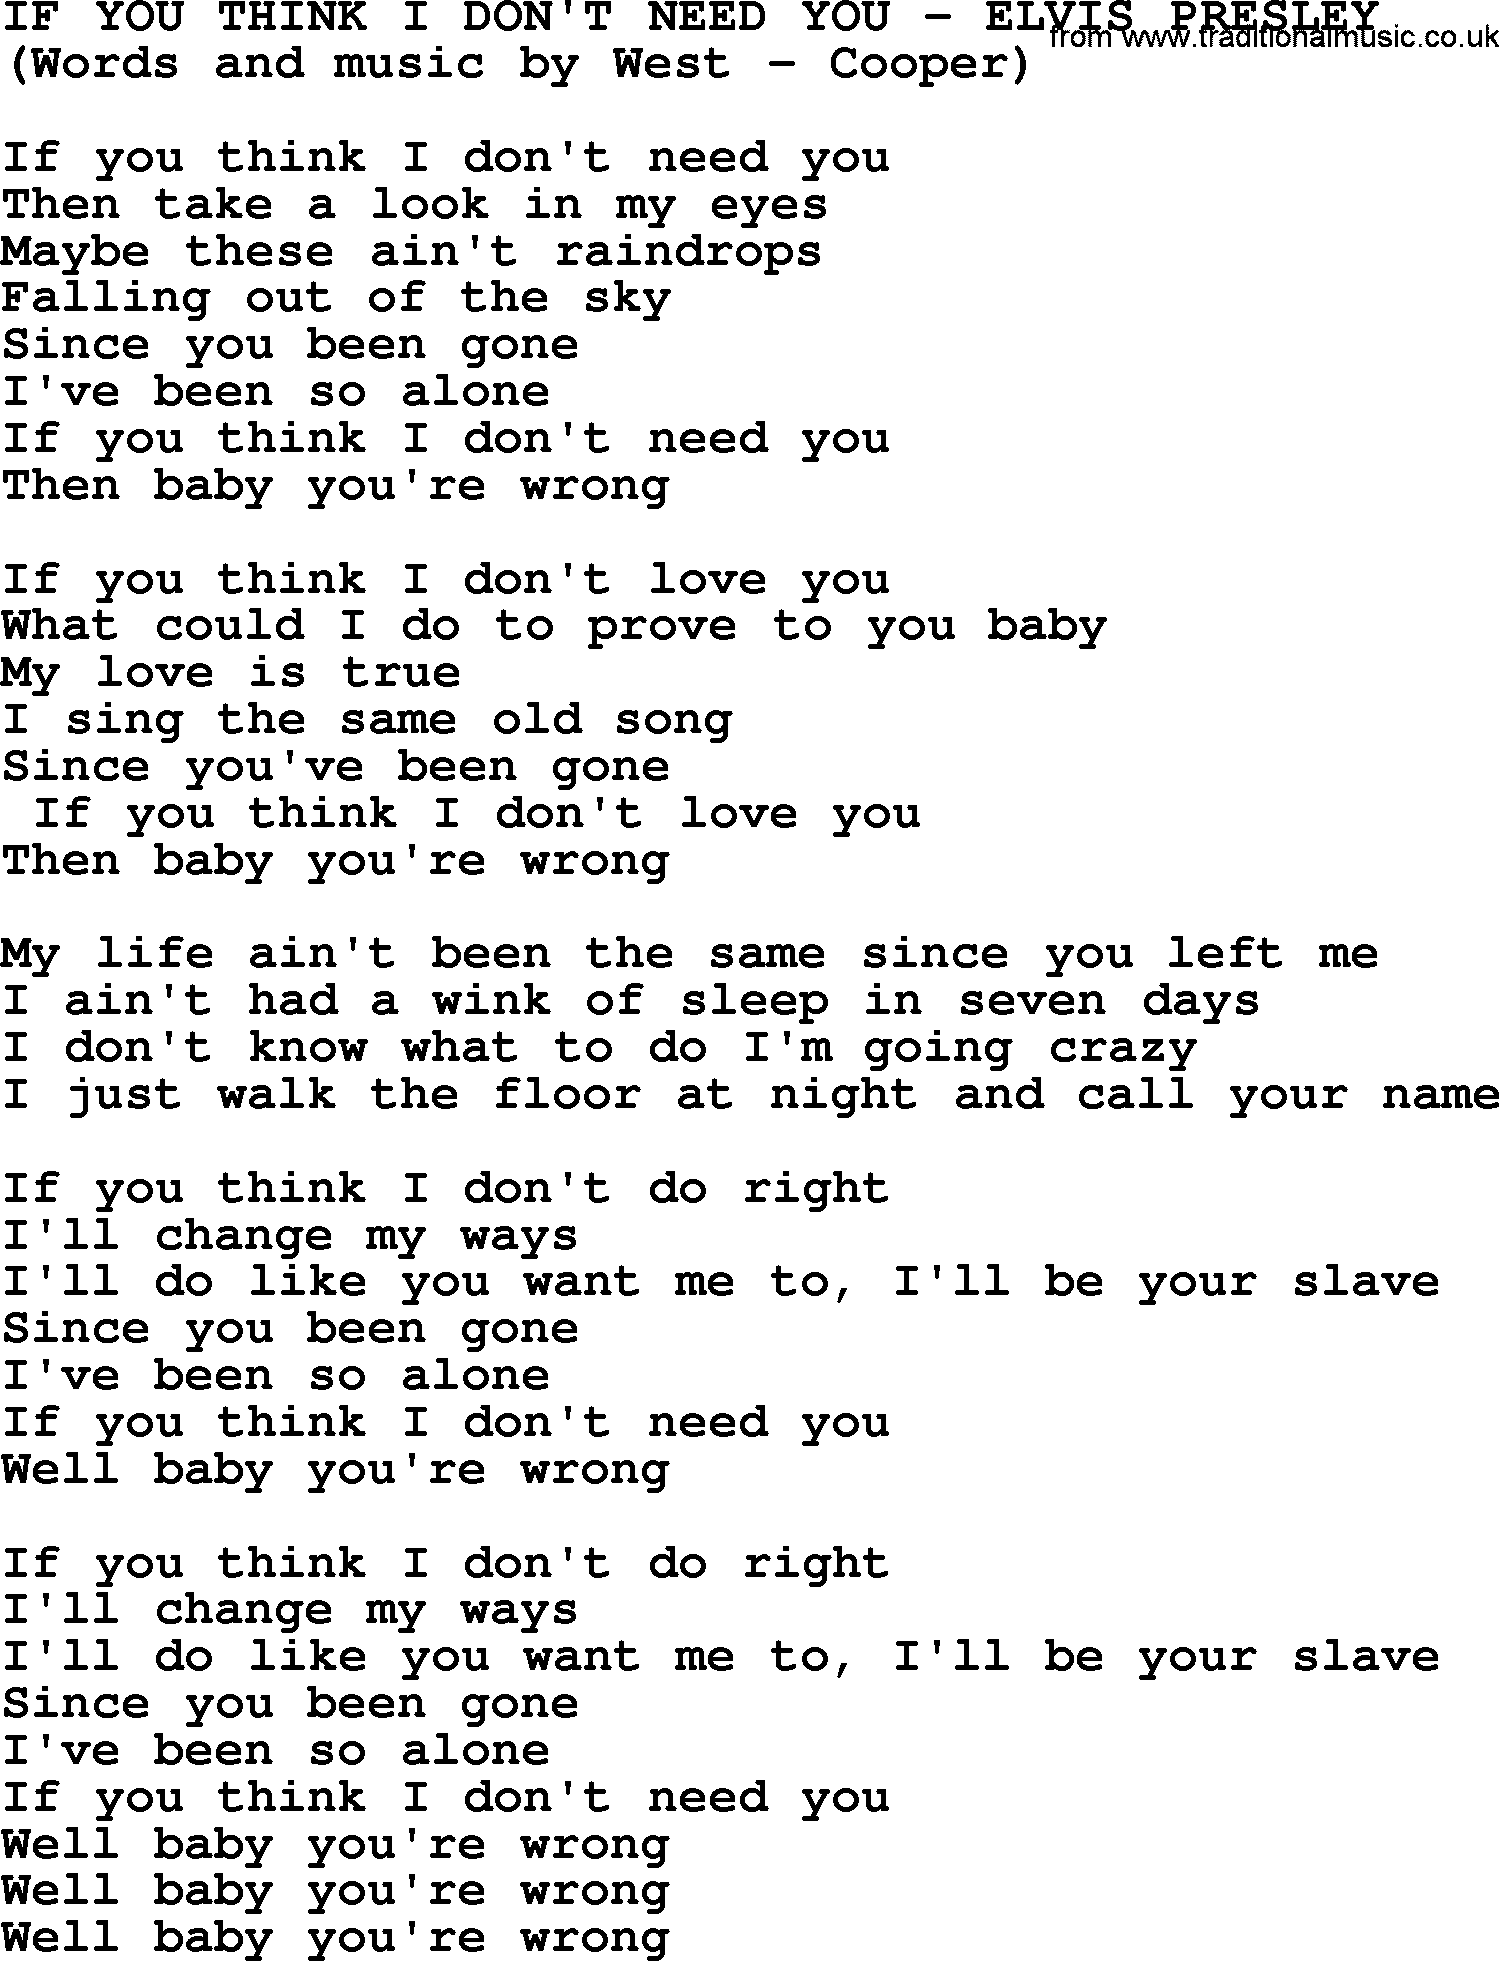 Elvis Presley song: If You Think I Don't Need You lyrics